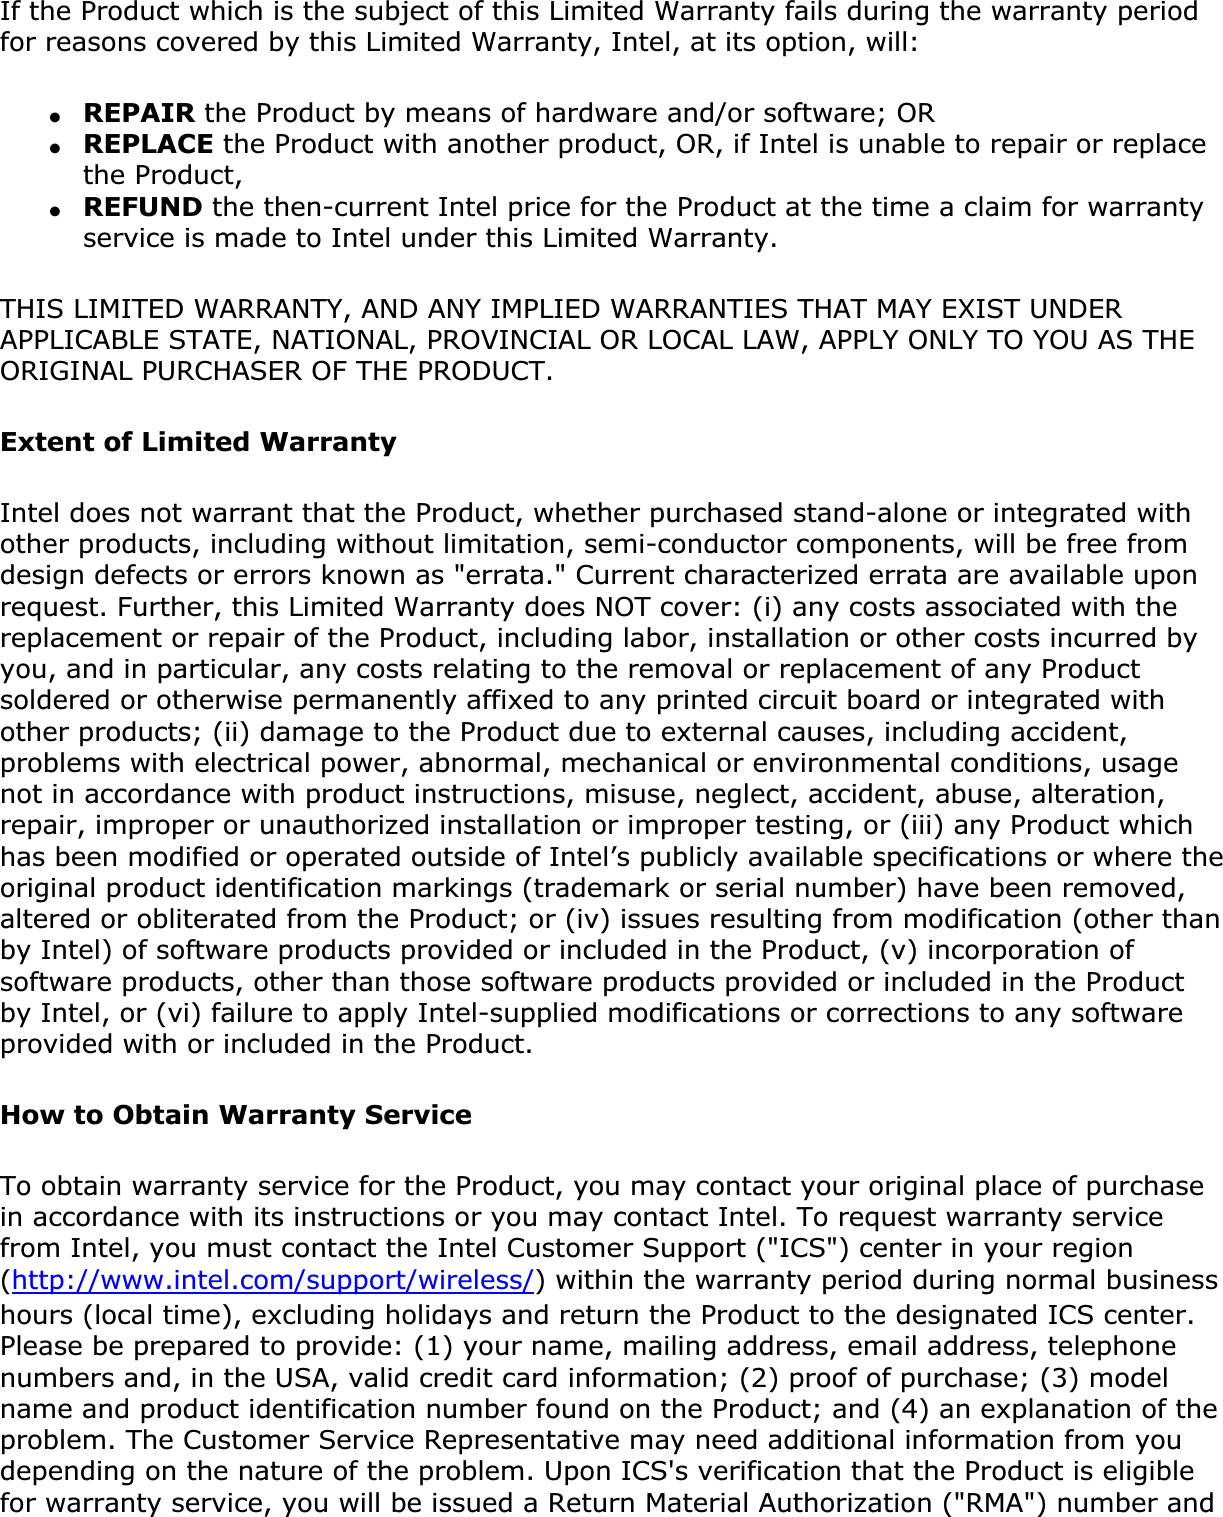 If the Product which is the subject of this Limited Warranty fails during the warranty period for reasons covered by this Limited Warranty, Intel, at its option, will:●REPAIR the Product by means of hardware and/or software; OR●REPLACE the Product with another product, OR, if Intel is unable to repair or replace the Product,●REFUND the then-current Intel price for the Product at the time a claim for warranty service is made to Intel under this Limited Warranty.THIS LIMITED WARRANTY, AND ANY IMPLIED WARRANTIES THAT MAY EXIST UNDER APPLICABLE STATE, NATIONAL, PROVINCIAL OR LOCAL LAW, APPLY ONLY TO YOU AS THE ORIGINAL PURCHASER OF THE PRODUCT.Extent of Limited WarrantyIntel does not warrant that the Product, whether purchased stand-alone or integrated with other products, including without limitation, semi-conductor components, will be free from design defects or errors known as &quot;errata.&quot; Current characterized errata are available upon request. Further, this Limited Warranty does NOT cover: (i) any costs associated with the replacement or repair of the Product, including labor, installation or other costs incurred by you, and in particular, any costs relating to the removal or replacement of any Product soldered or otherwise permanently affixed to any printed circuit board or integrated with other products; (ii) damage to the Product due to external causes, including accident, problems with electrical power, abnormal, mechanical or environmental conditions, usage not in accordance with product instructions, misuse, neglect, accident, abuse, alteration, repair, improper or unauthorized installation or improper testing, or (iii) any Product which has been modified or operated outside of Intel’s publicly available specifications or where the original product identification markings (trademark or serial number) have been removed, altered or obliterated from the Product; or (iv) issues resulting from modification (other than by Intel) of software products provided or included in the Product, (v) incorporation of software products, other than those software products provided or included in the Product by Intel, or (vi) failure to apply Intel-supplied modifications or corrections to any software provided with or included in the Product.How to Obtain Warranty ServiceTo obtain warranty service for the Product, you may contact your original place of purchase in accordance with its instructions or you may contact Intel. To request warranty service from Intel, you must contact the Intel Customer Support (&quot;ICS&quot;) center in your region (http://www.intel.com/support/wireless/) within the warranty period during normal business hours (local time), excluding holidays and return the Product to the designated ICS center. Please be prepared to provide: (1) your name, mailing address, email address, telephone numbers and, in the USA, valid credit card information; (2) proof of purchase; (3) model name and product identification number found on the Product; and (4) an explanation of the problem. The Customer Service Representative may need additional information from you depending on the nature of the problem. Upon ICS&apos;s verification that the Product is eligible for warranty service, you will be issued a Return Material Authorization (&quot;RMA&quot;) number and 